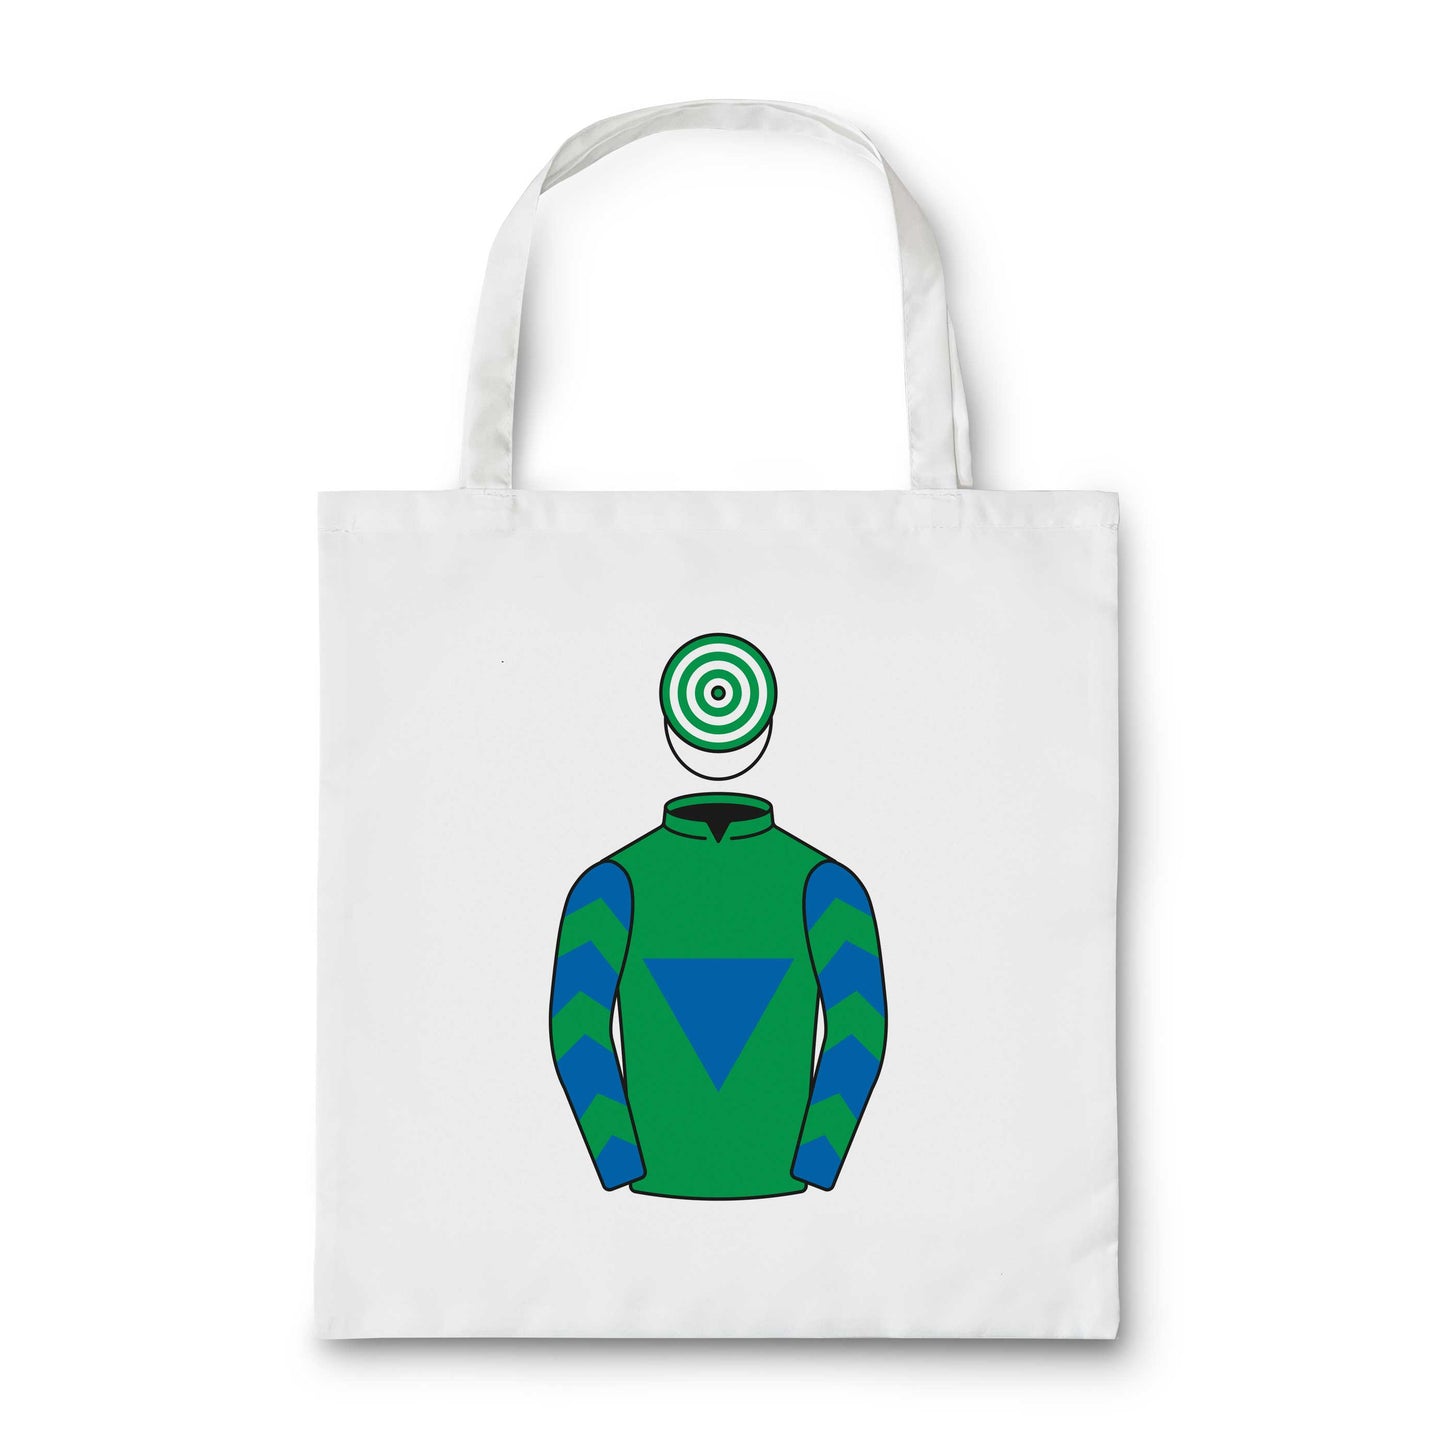 Laois Limerick Syndicate Tote Bag - Tote Bag - Hacked Up